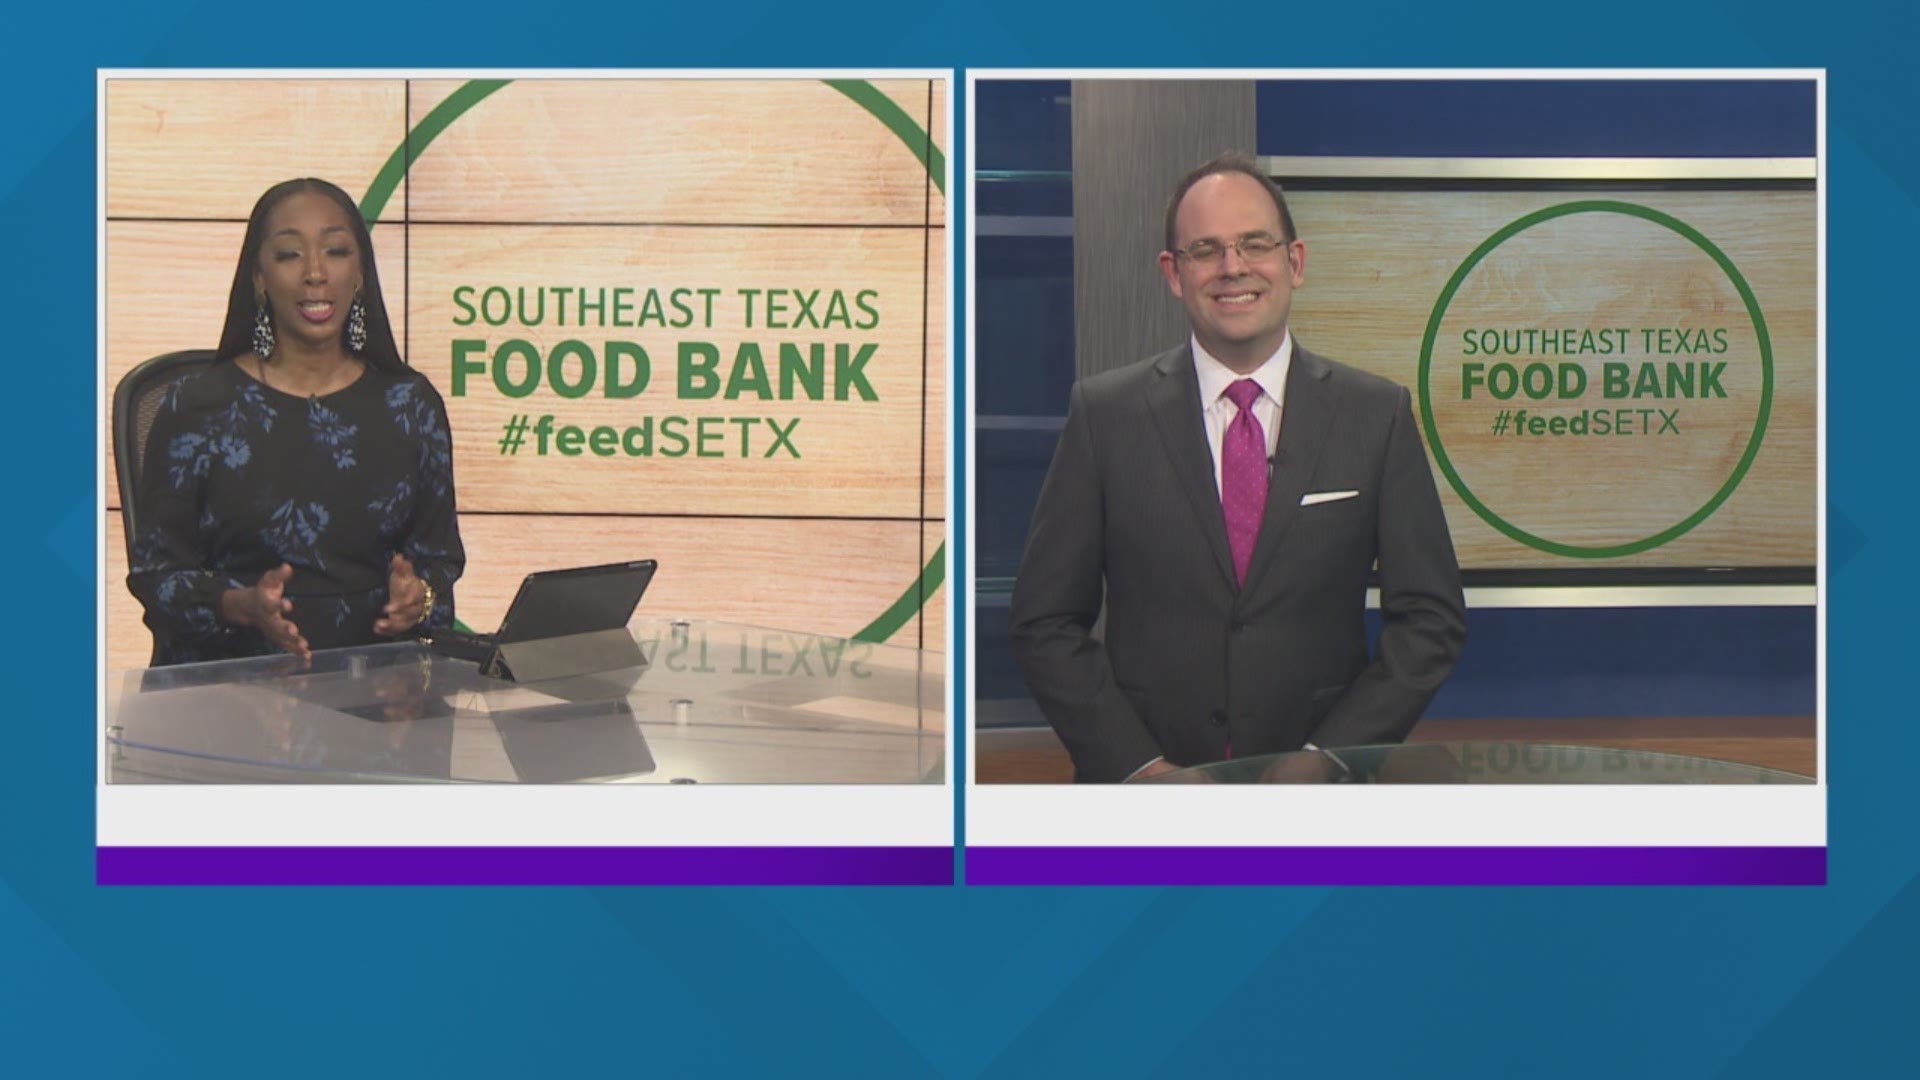 Together with the community and corporate partners, 12News and the Southeast Texas Food Bank are moving toward the goal of raising $250,000